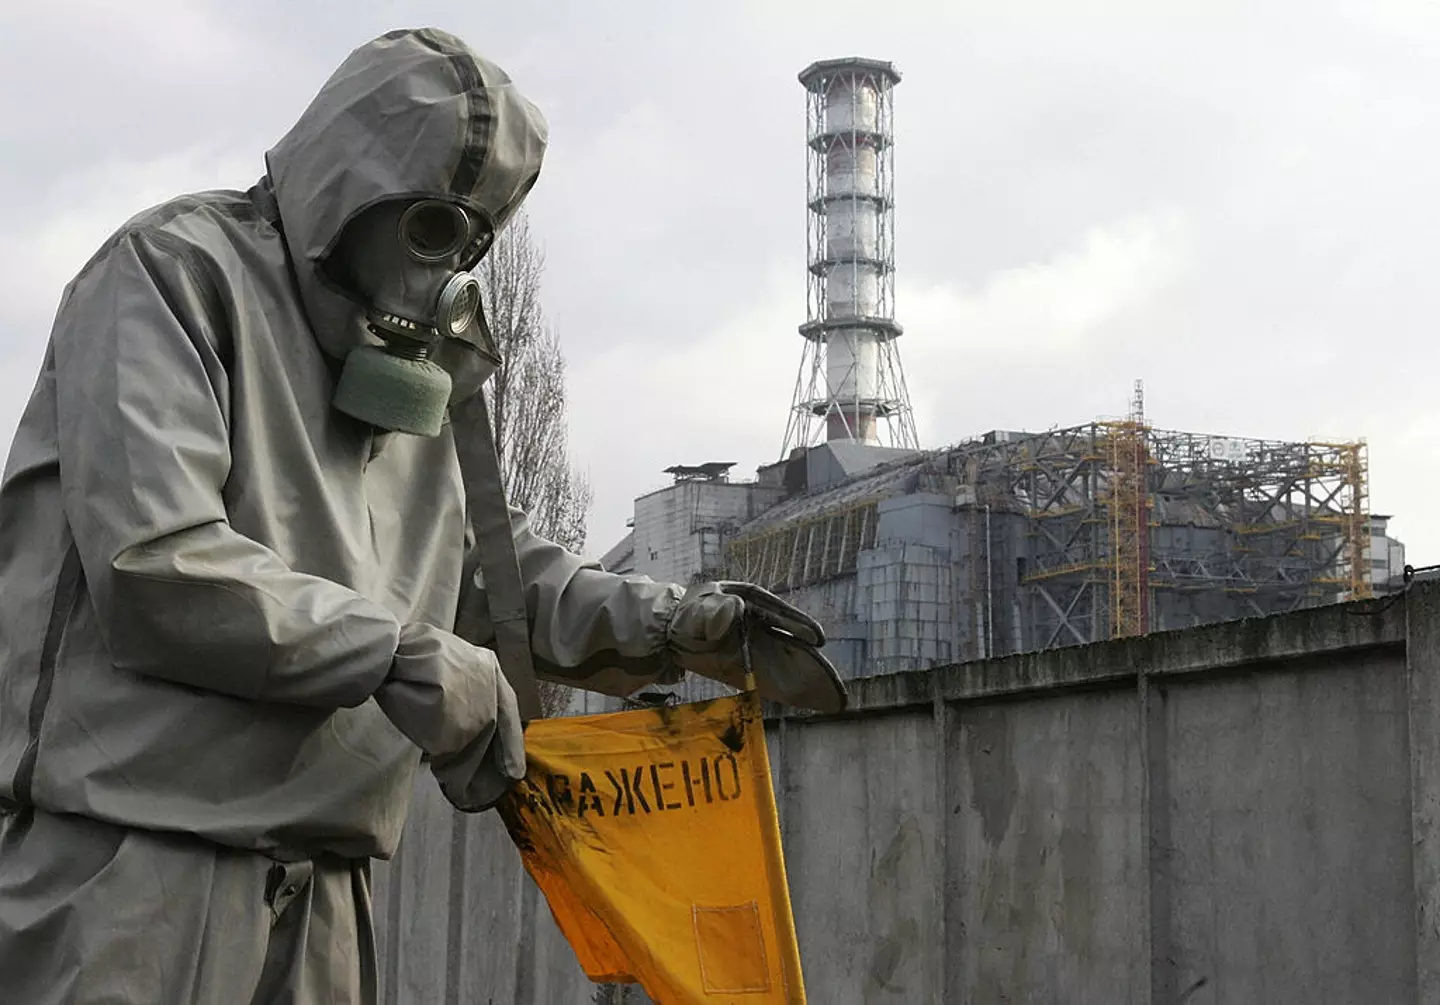 Thousands have died as a result of the Chernobyl disaster. (SERGEI SUPINSKY/AFP via Getty Images)